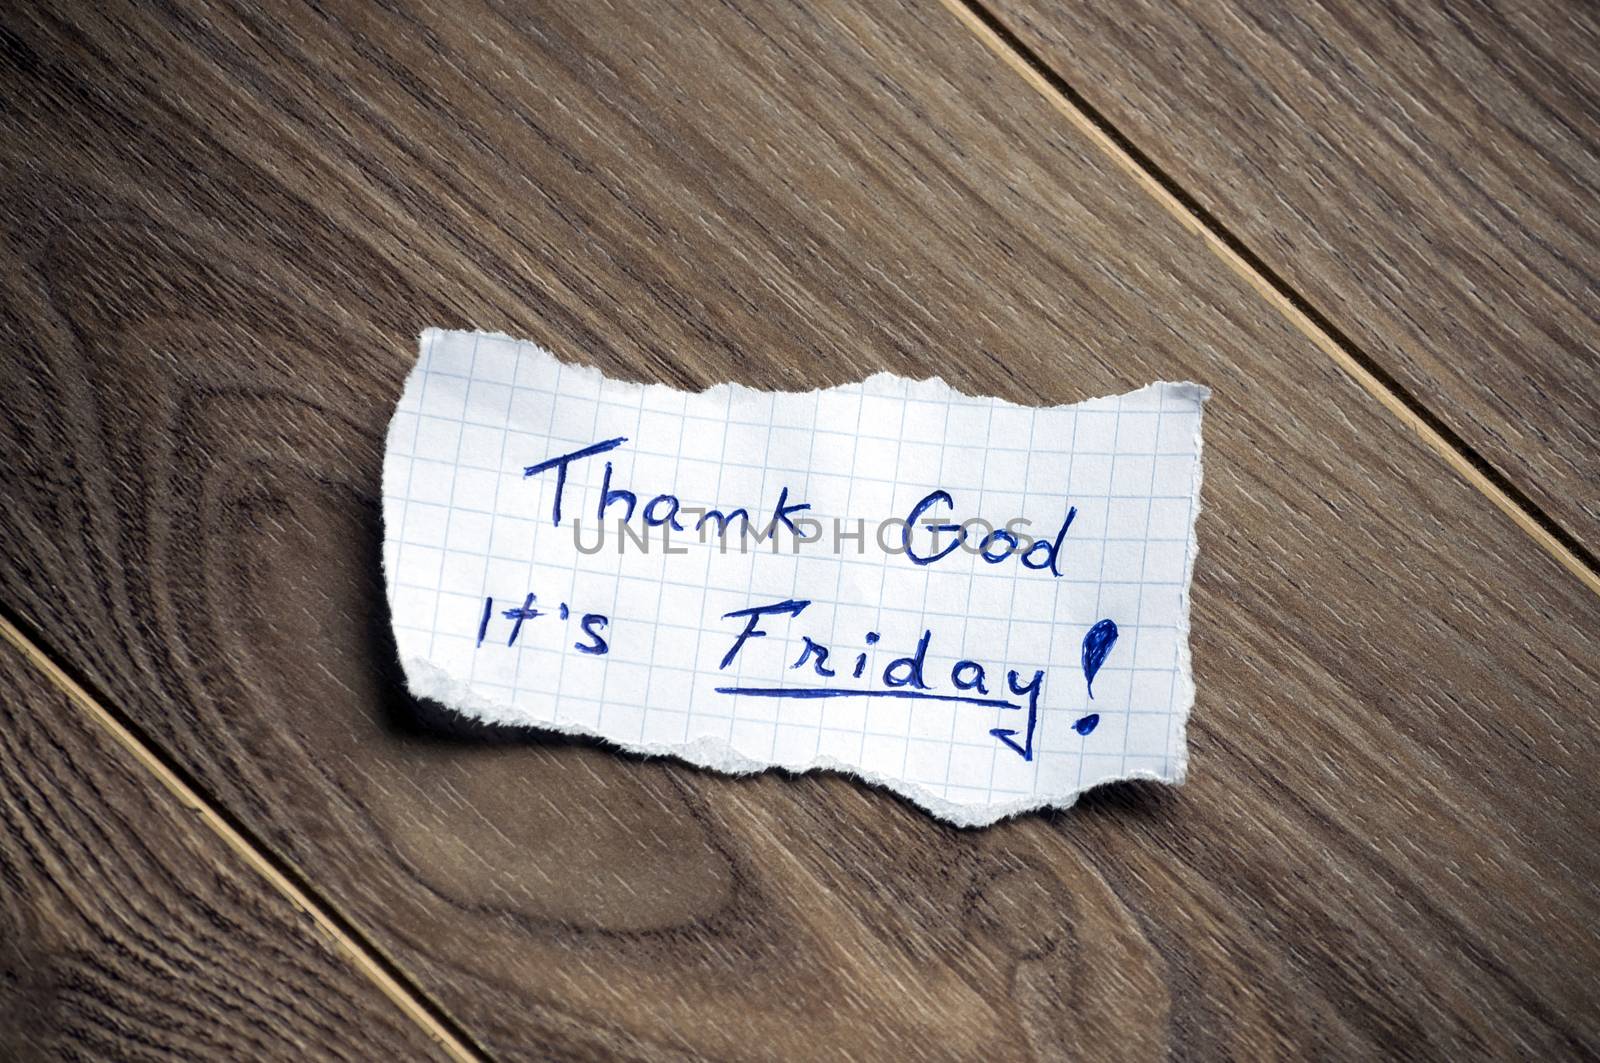 Friday message written on piece of paper, on a wood background.